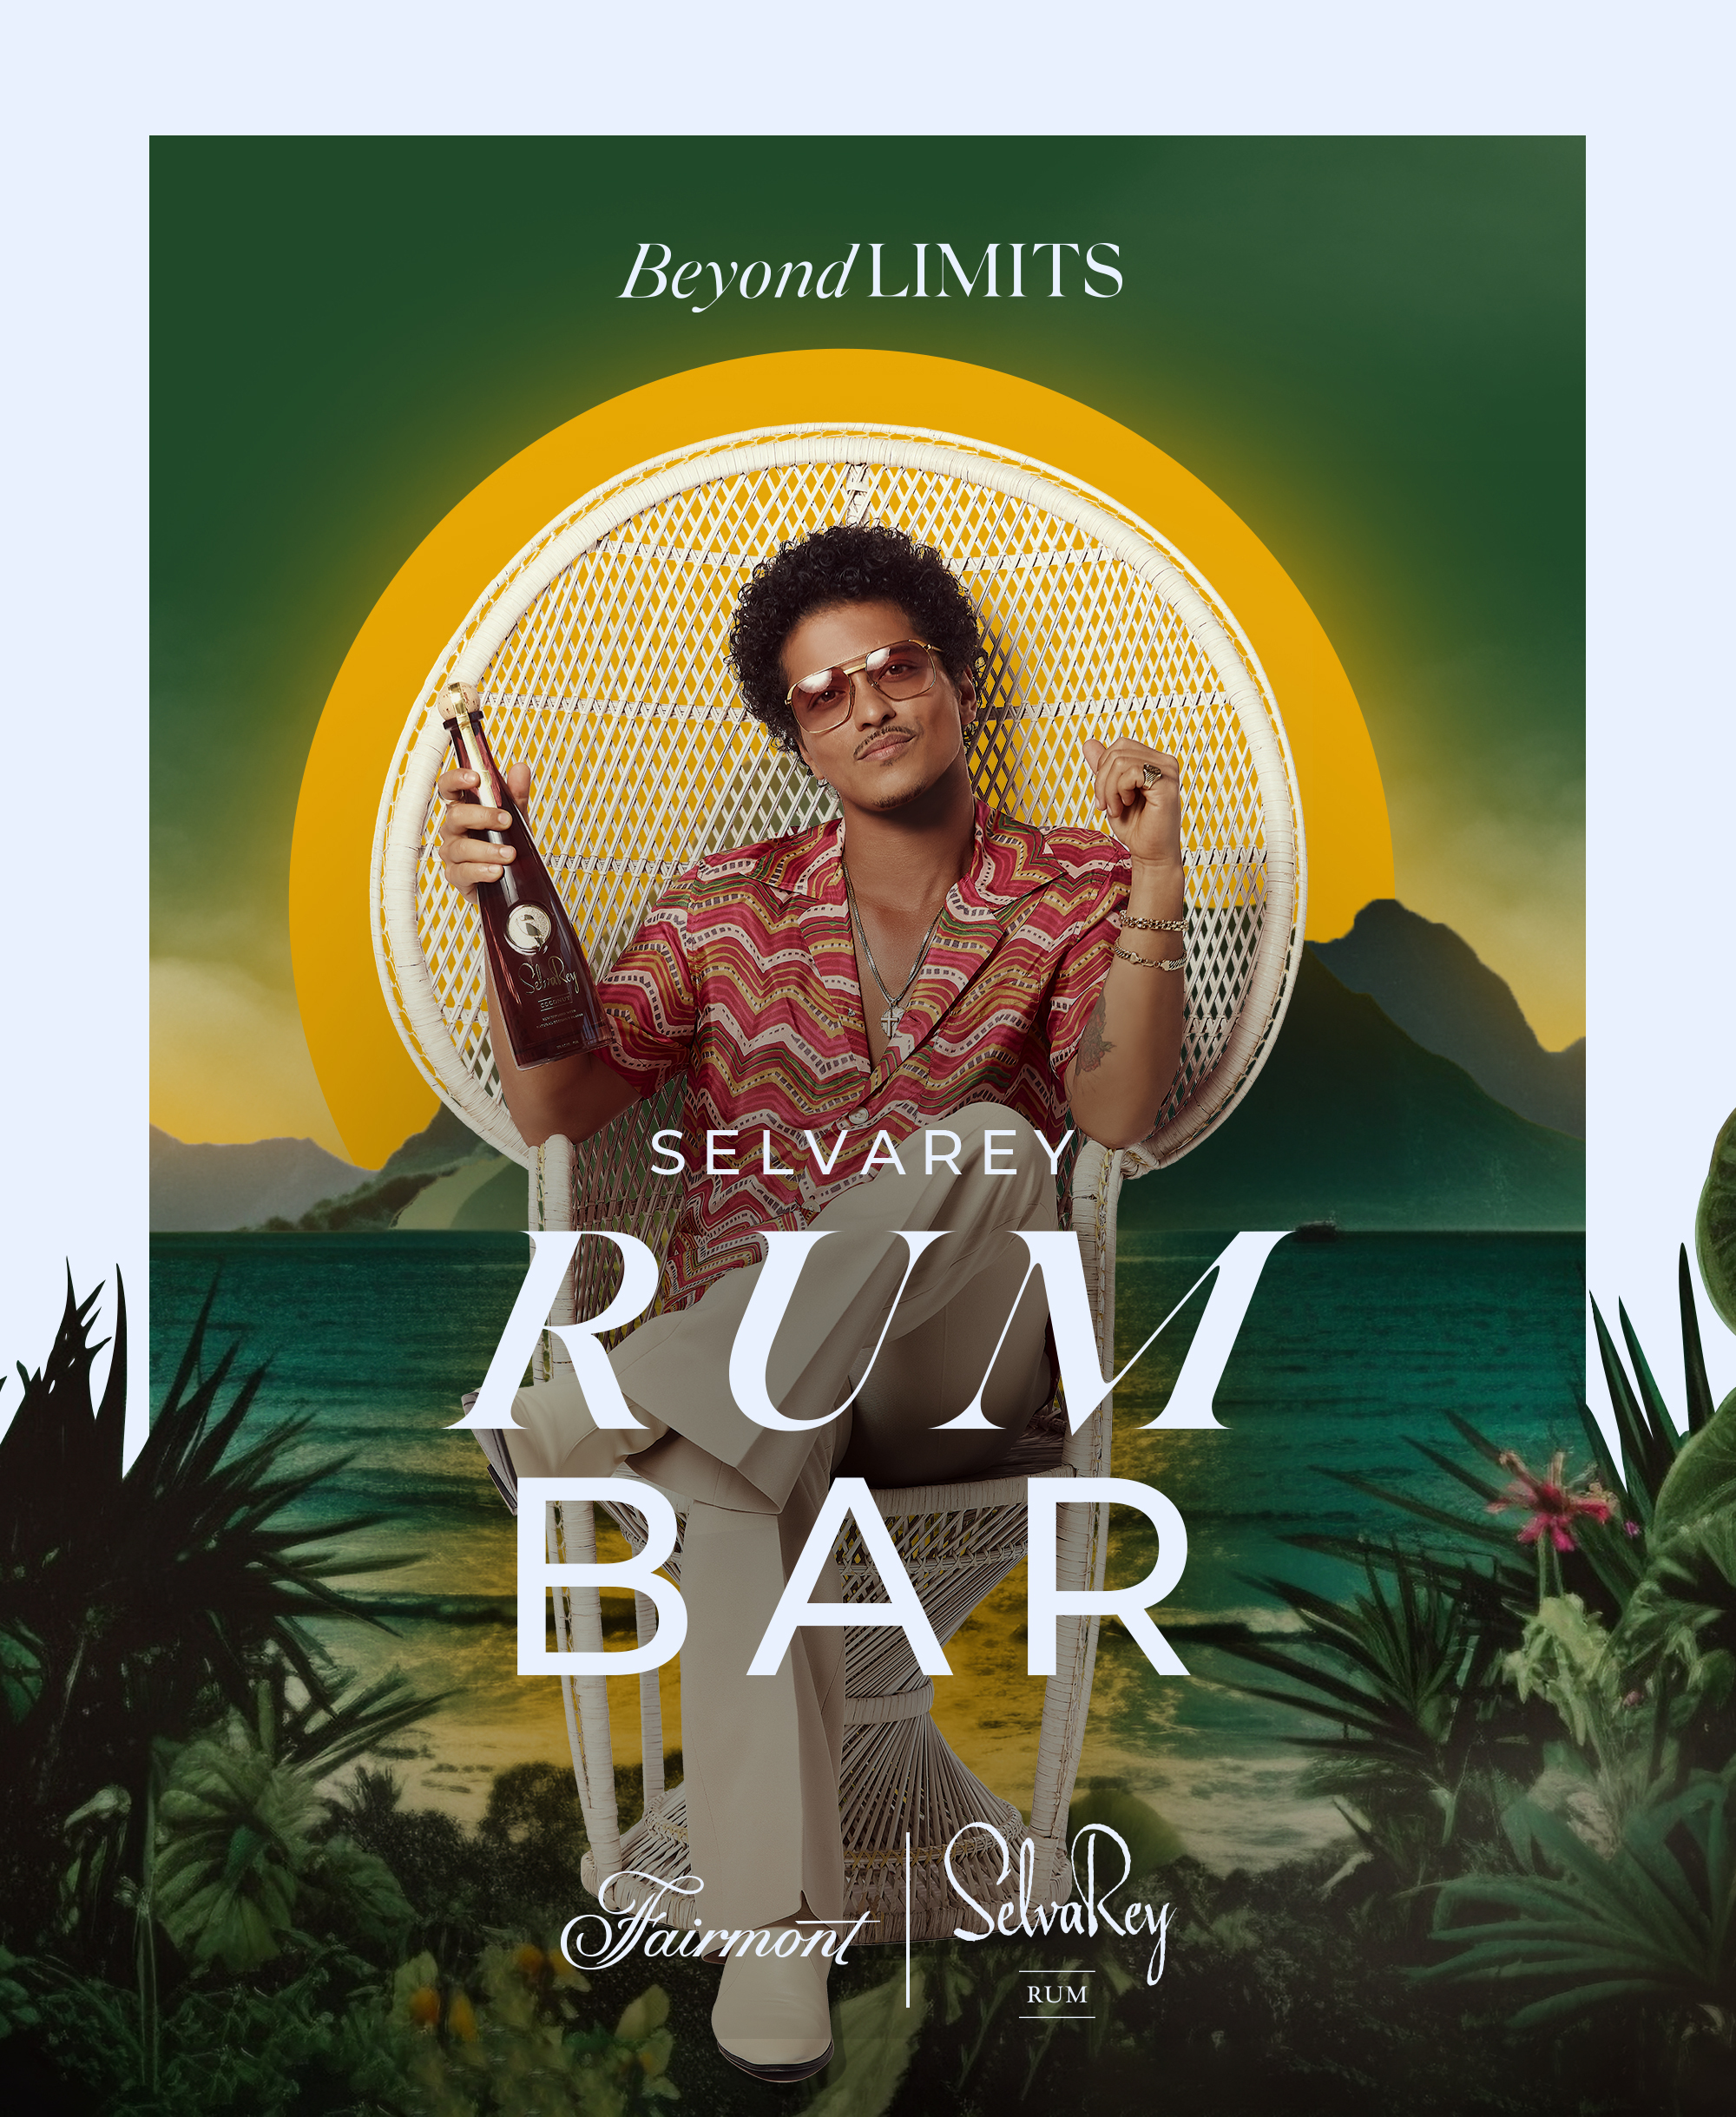 Fairmont Orchid serves up a taste of tropical luxury at the ‘SelvaRey Rum Bar’ this summer